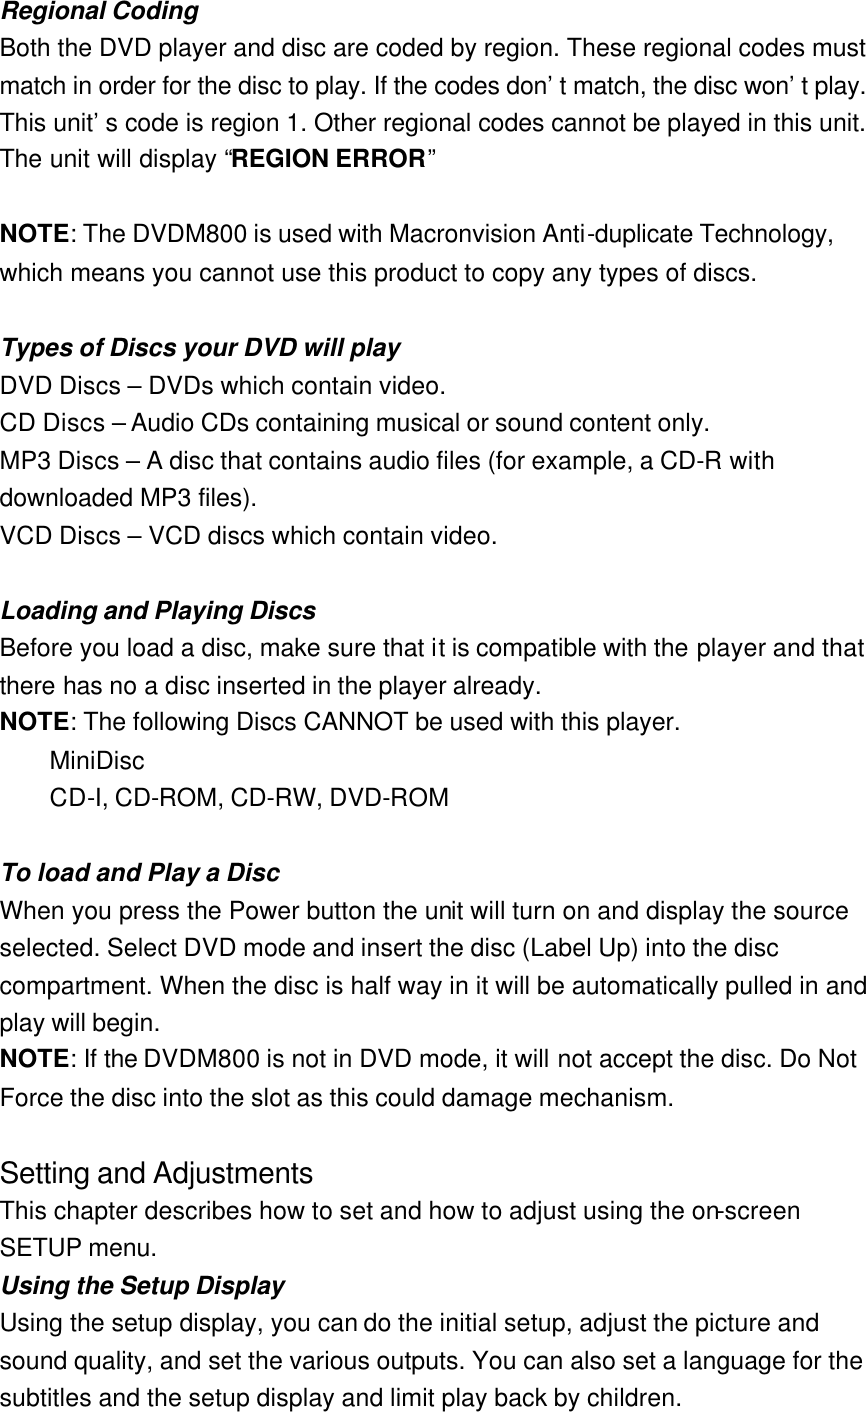 Regional Coding Both the DVD player and disc are coded by region. These regional codes must match in order for the disc to play. If the codes don’t match, the disc won’t play. This unit’s code is region 1. Other regional codes cannot be played in this unit. The unit will display “REGION ERROR”  NOTE: The DVDM800 is used with Macronvision Anti-duplicate Technology, which means you cannot use this product to copy any types of discs.  Types of Discs your DVD will play DVD Discs – DVDs which contain video. CD Discs – Audio CDs containing musical or sound content only. MP3 Discs – A disc that contains audio files (for example, a CD-R with downloaded MP3 files). VCD Discs – VCD discs which contain video.  Loading and Playing Discs Before you load a disc, make sure that it is compatible with the player and that there has no a disc inserted in the player already. NOTE: The following Discs CANNOT be used with this player.  MiniDisc    CD-I, CD-ROM, CD-RW, DVD-ROM  To load and Play a Disc When you press the Power button the unit will turn on and display the source selected. Select DVD mode and insert the disc (Label Up) into the disc compartment. When the disc is half way in it will be automatically pulled in and play will begin. NOTE: If the DVDM800 is not in DVD mode, it will not accept the disc. Do Not Force the disc into the slot as this could damage mechanism.  Setting and Adjustments This chapter describes how to set and how to adjust using the on-screen SETUP menu. Using the Setup Display Using the setup display, you can do the initial setup, adjust the picture and sound quality, and set the various outputs. You can also set a language for the subtitles and the setup display and limit play back by children. 